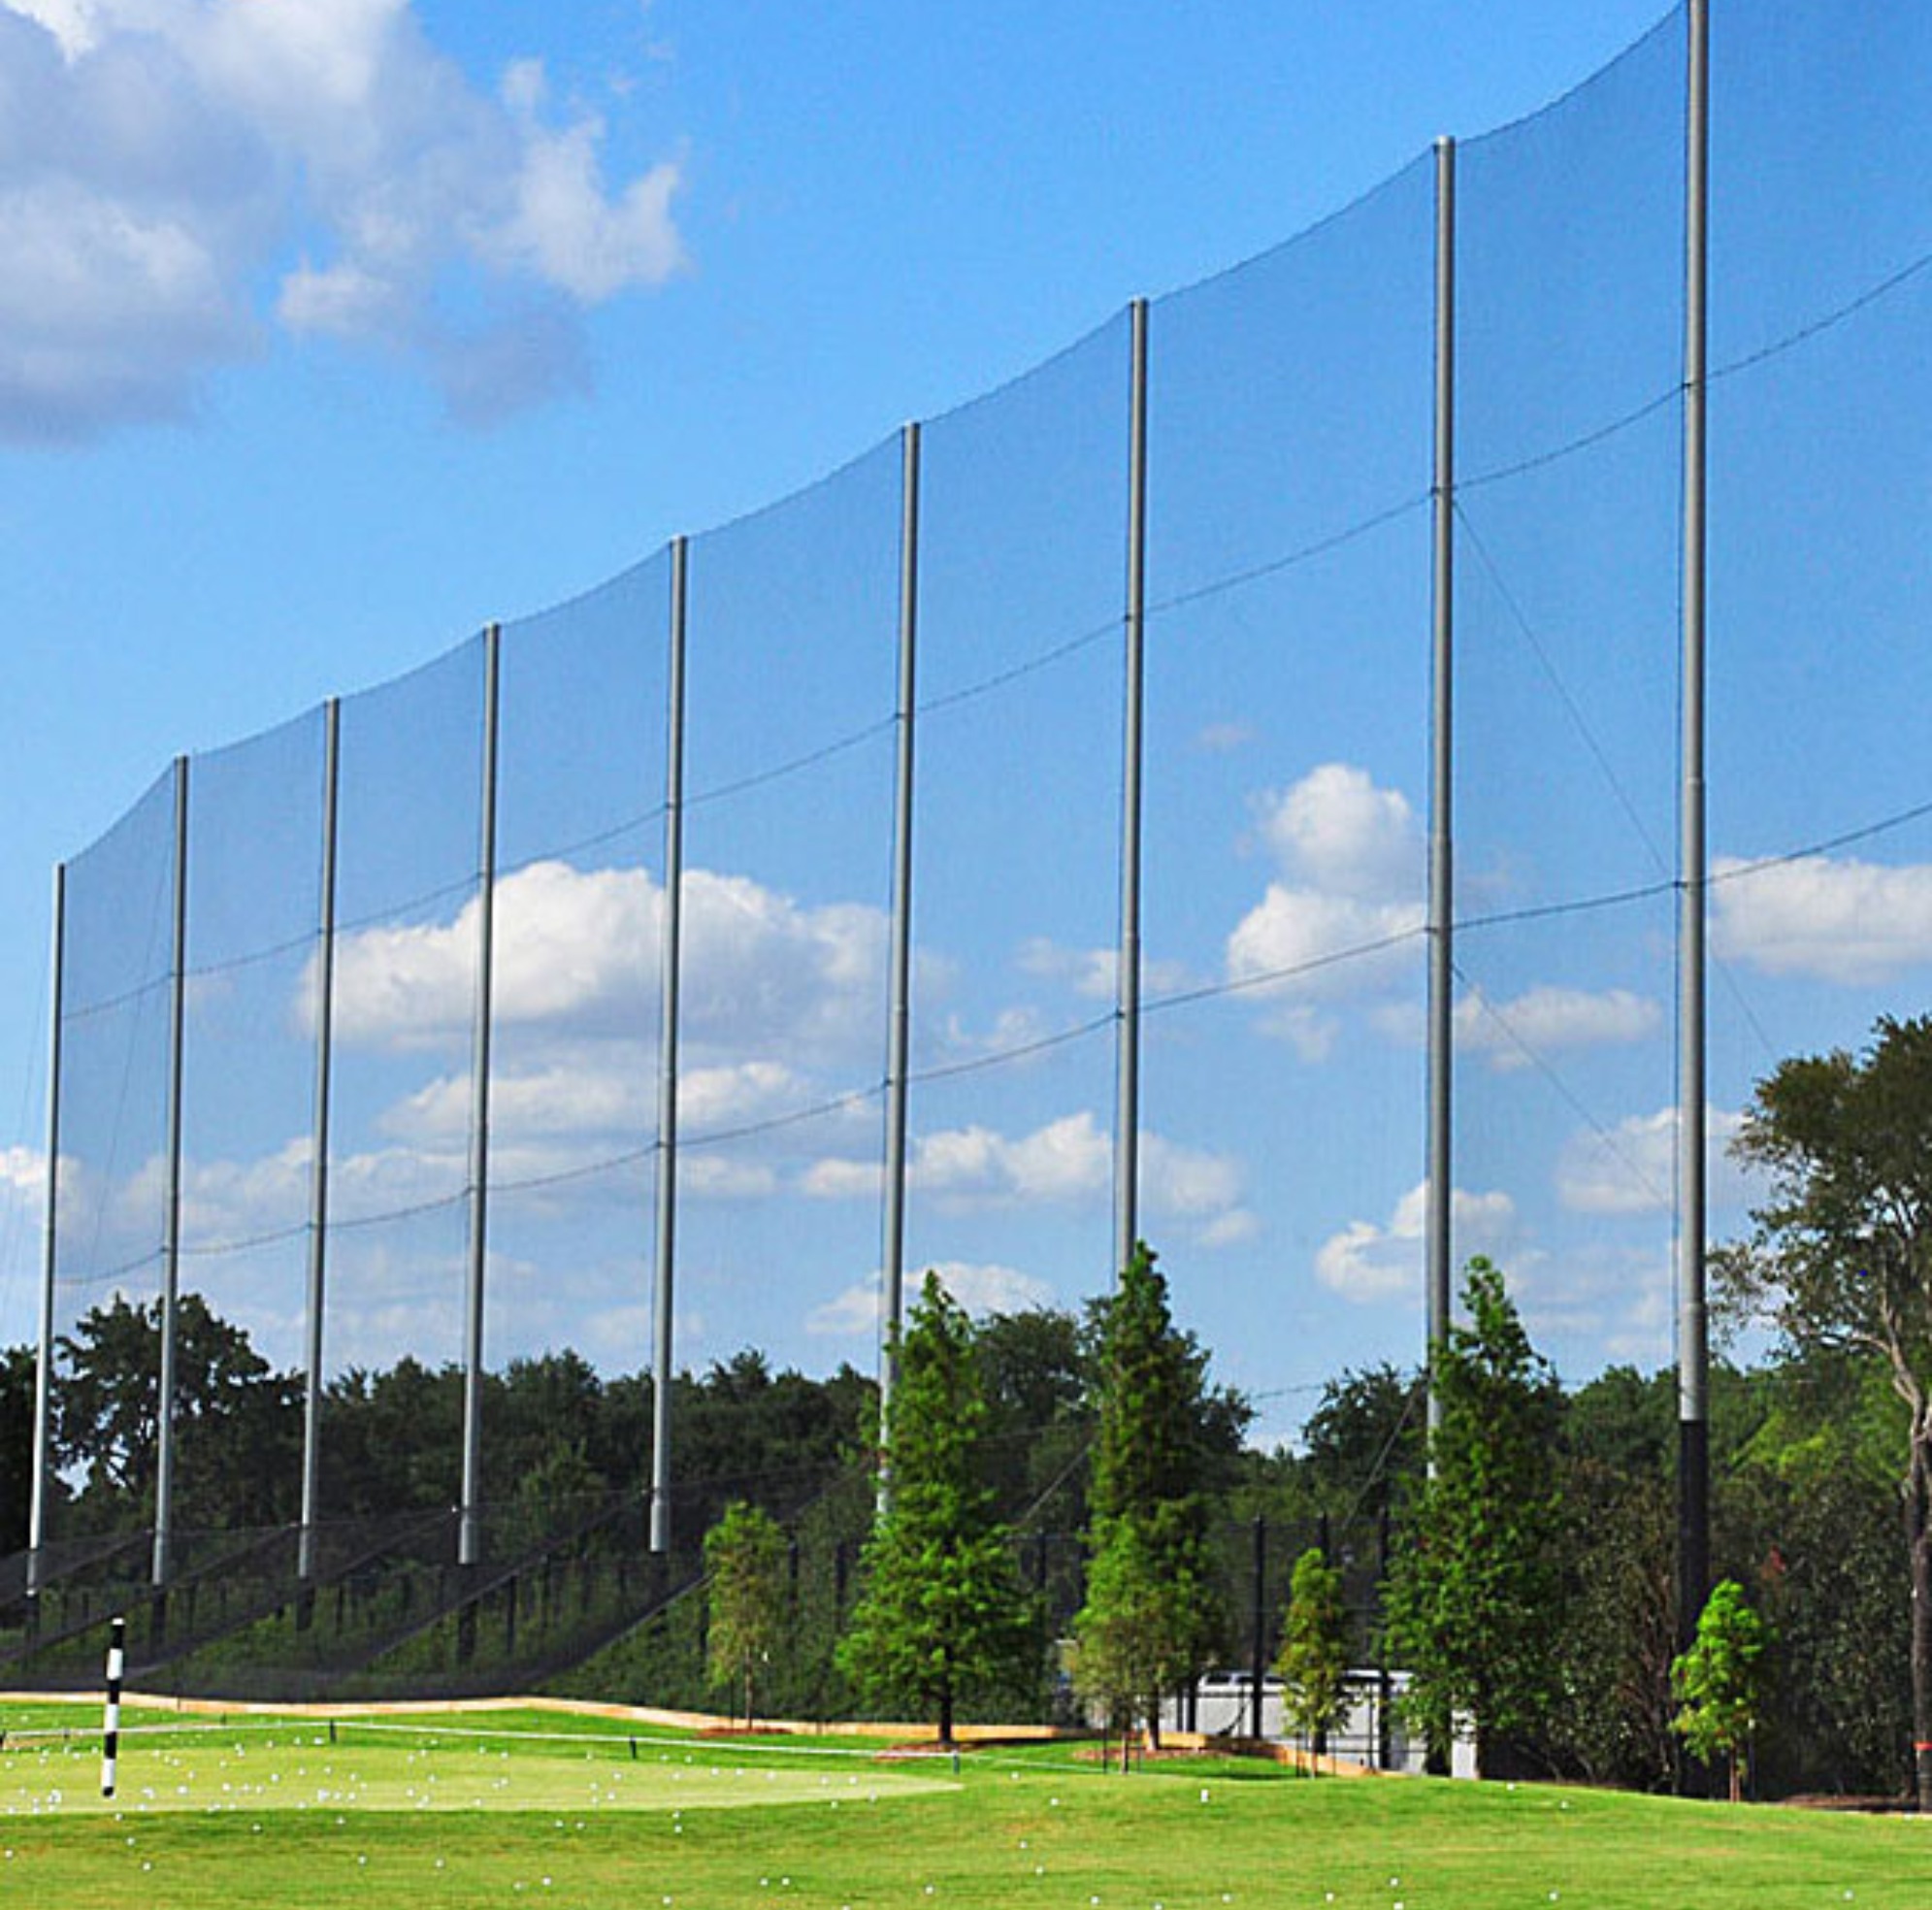 Golf Sports Netting in Many Stocked Sizes or Custom to Your Specs; Use for Barrier Nets at Home, Driving Ranges, Fairways, Golf Courses, & Indoor Golf Net.